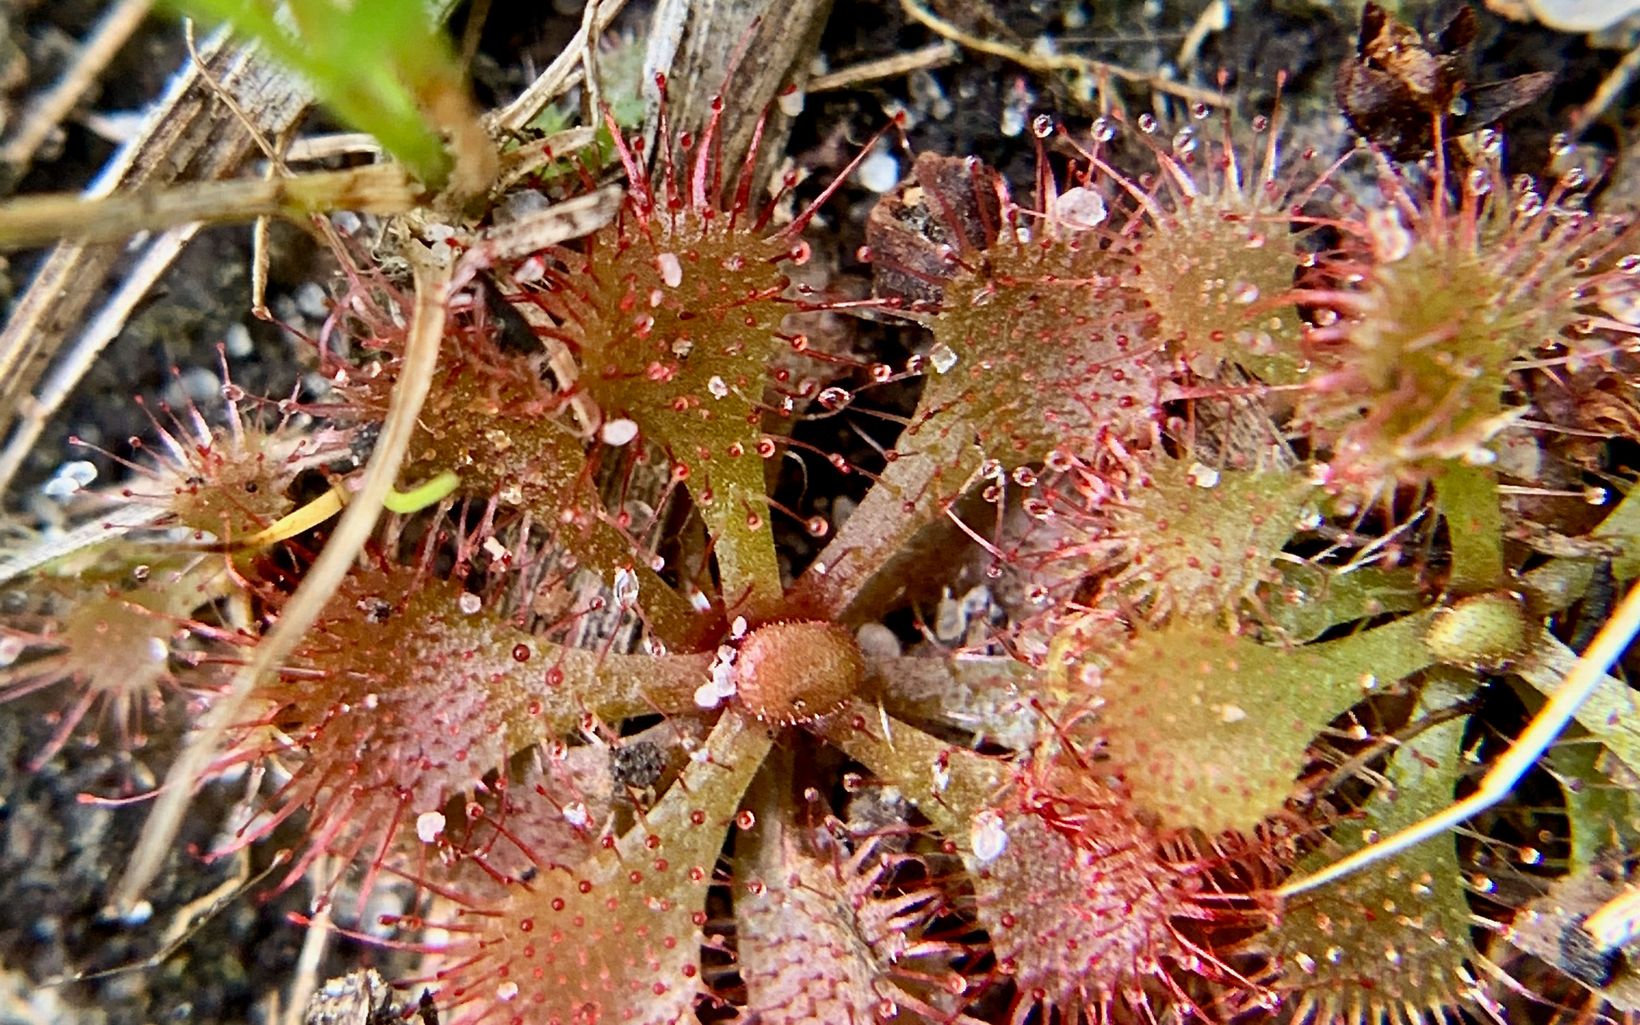 Drosera brevifolia, is an exciting find at Nassawango! The species has never before been found further north than North Carolina.